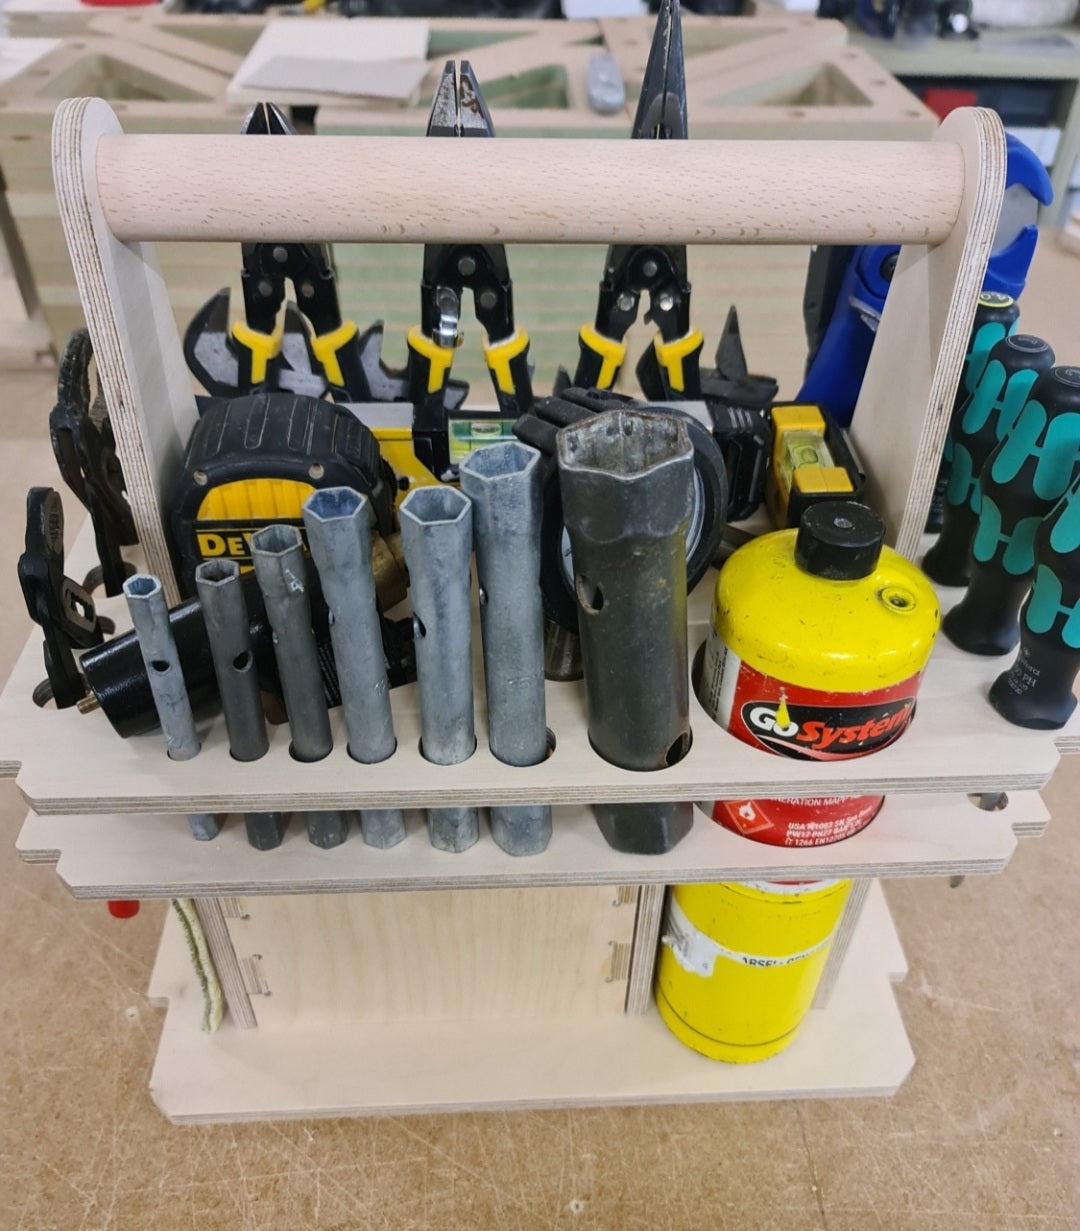 Sys5 Plumbers Insert with Drawer